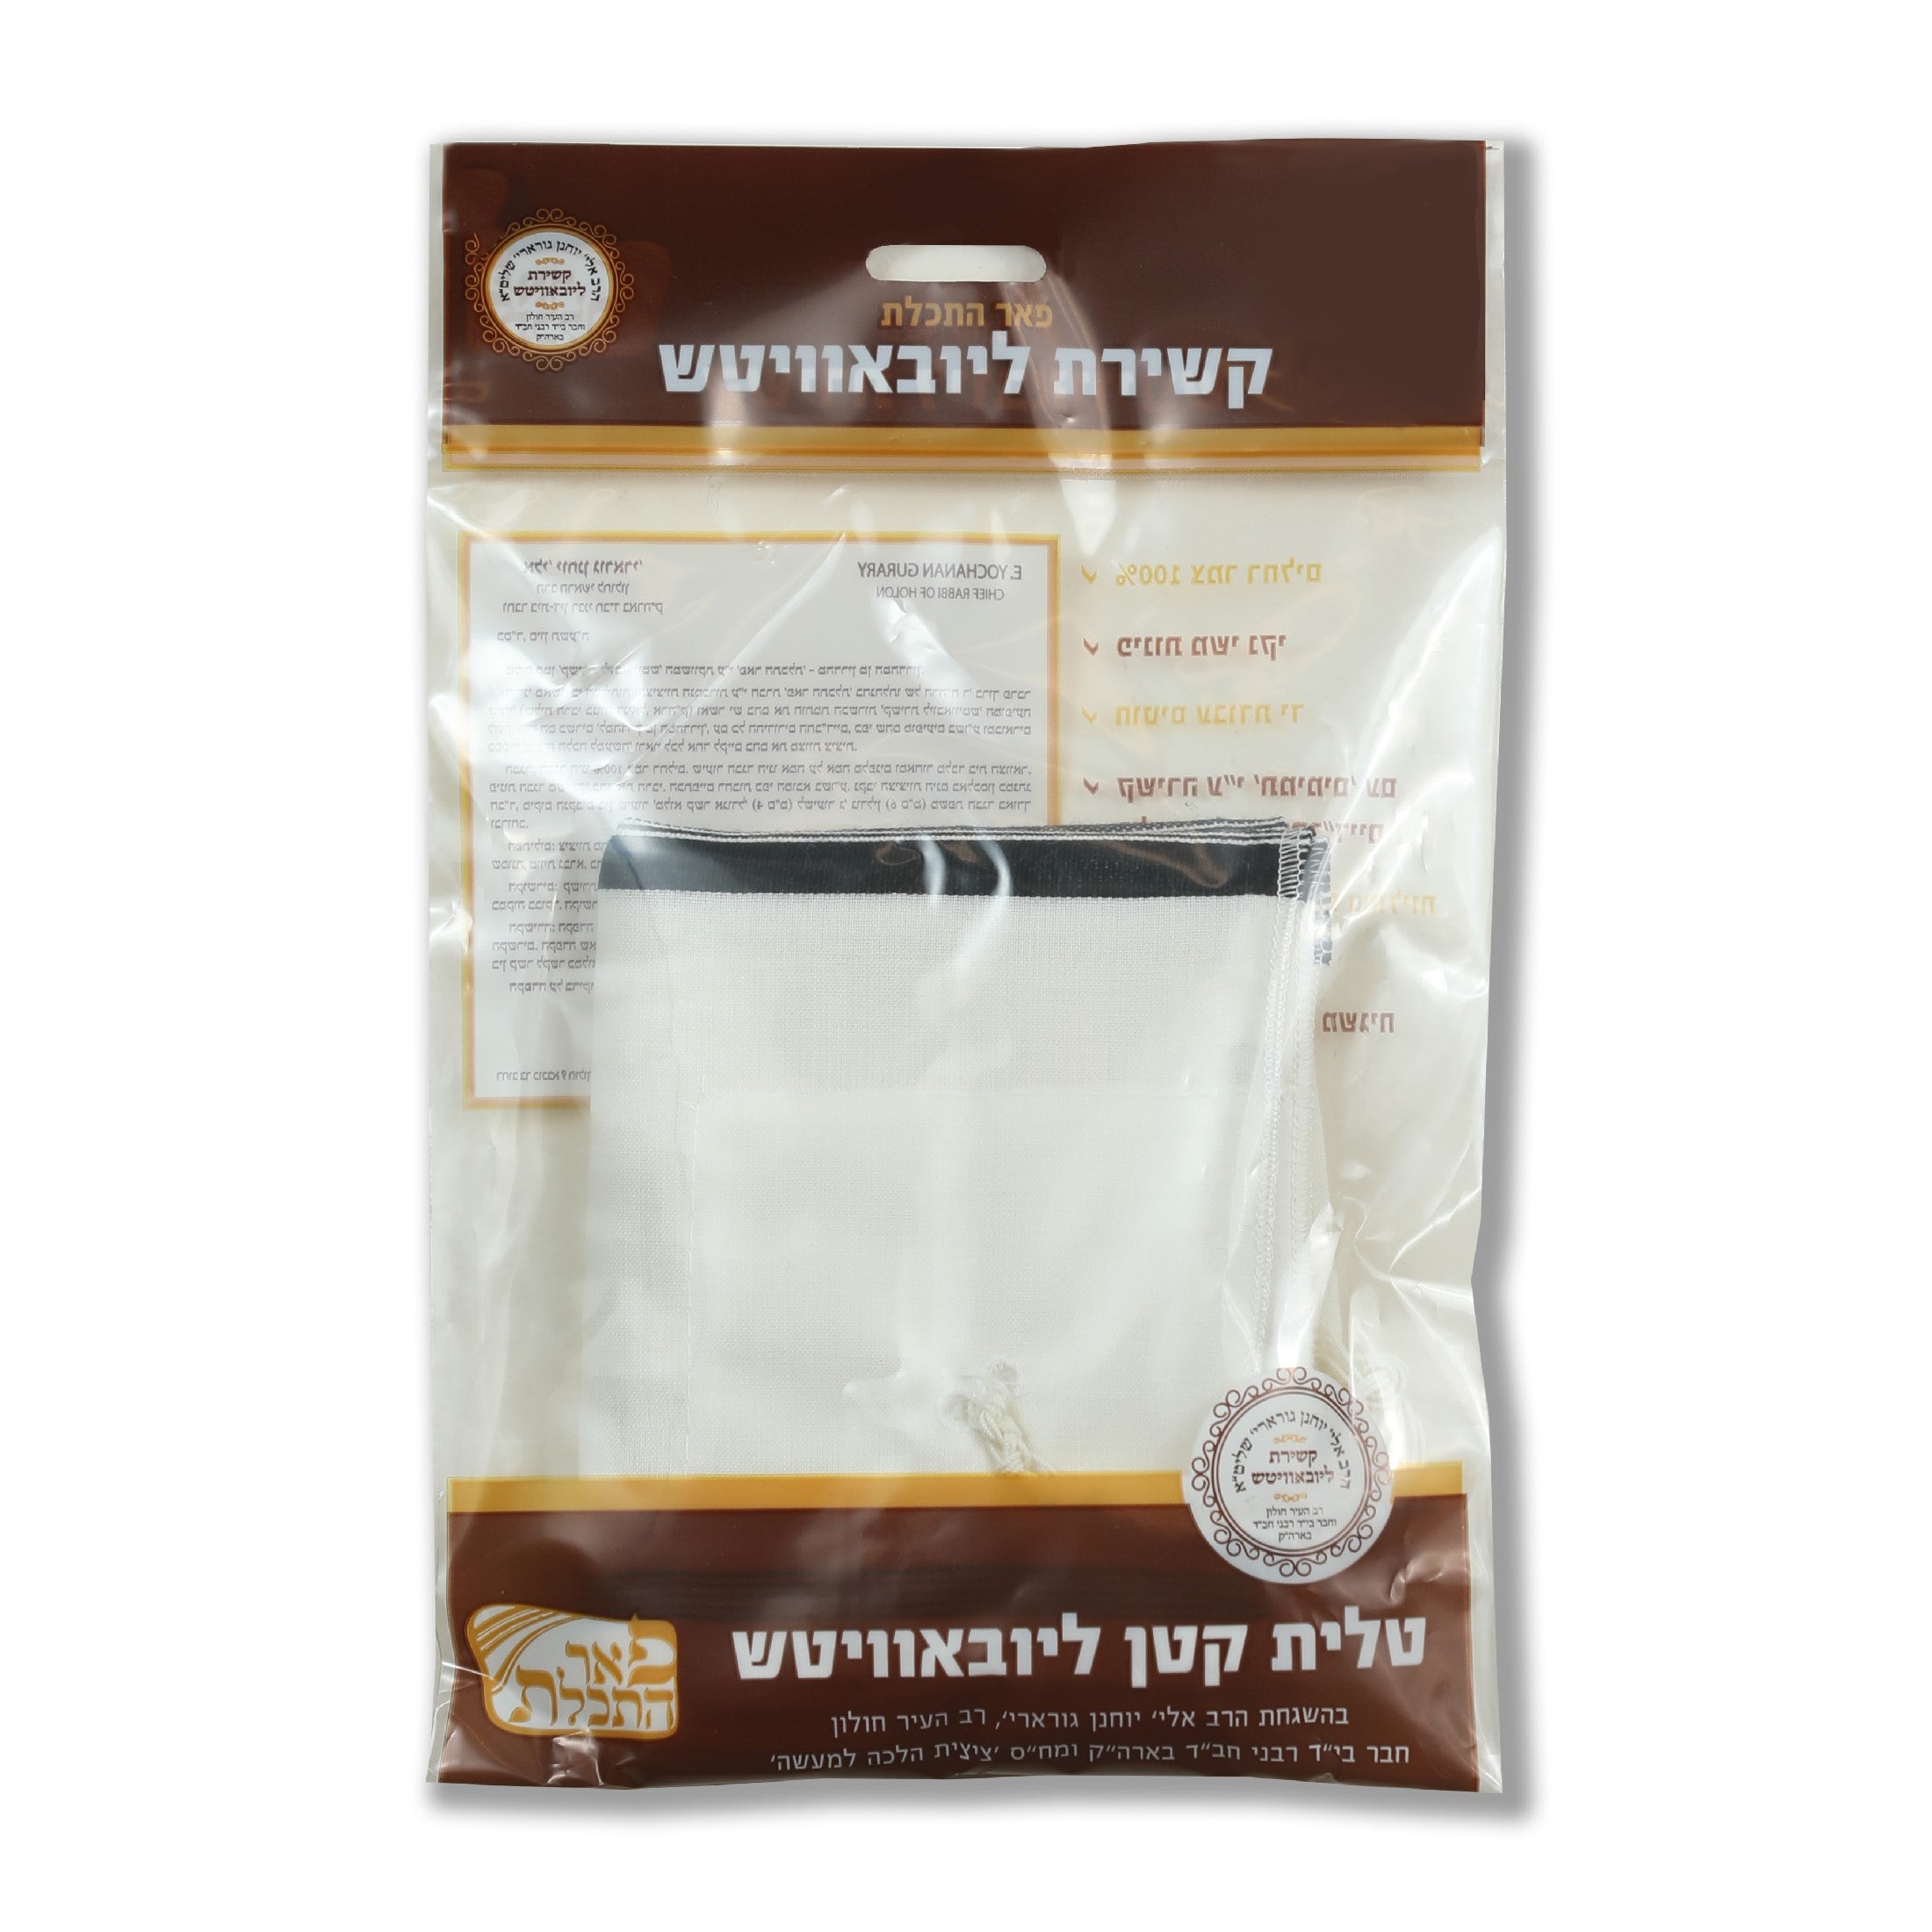 Chabad Tzitzit Wool tallit katan kosher Hand-Made with Packaging and Tying by Peer-Hatchelet, Sizes 08 - 28, Talitania